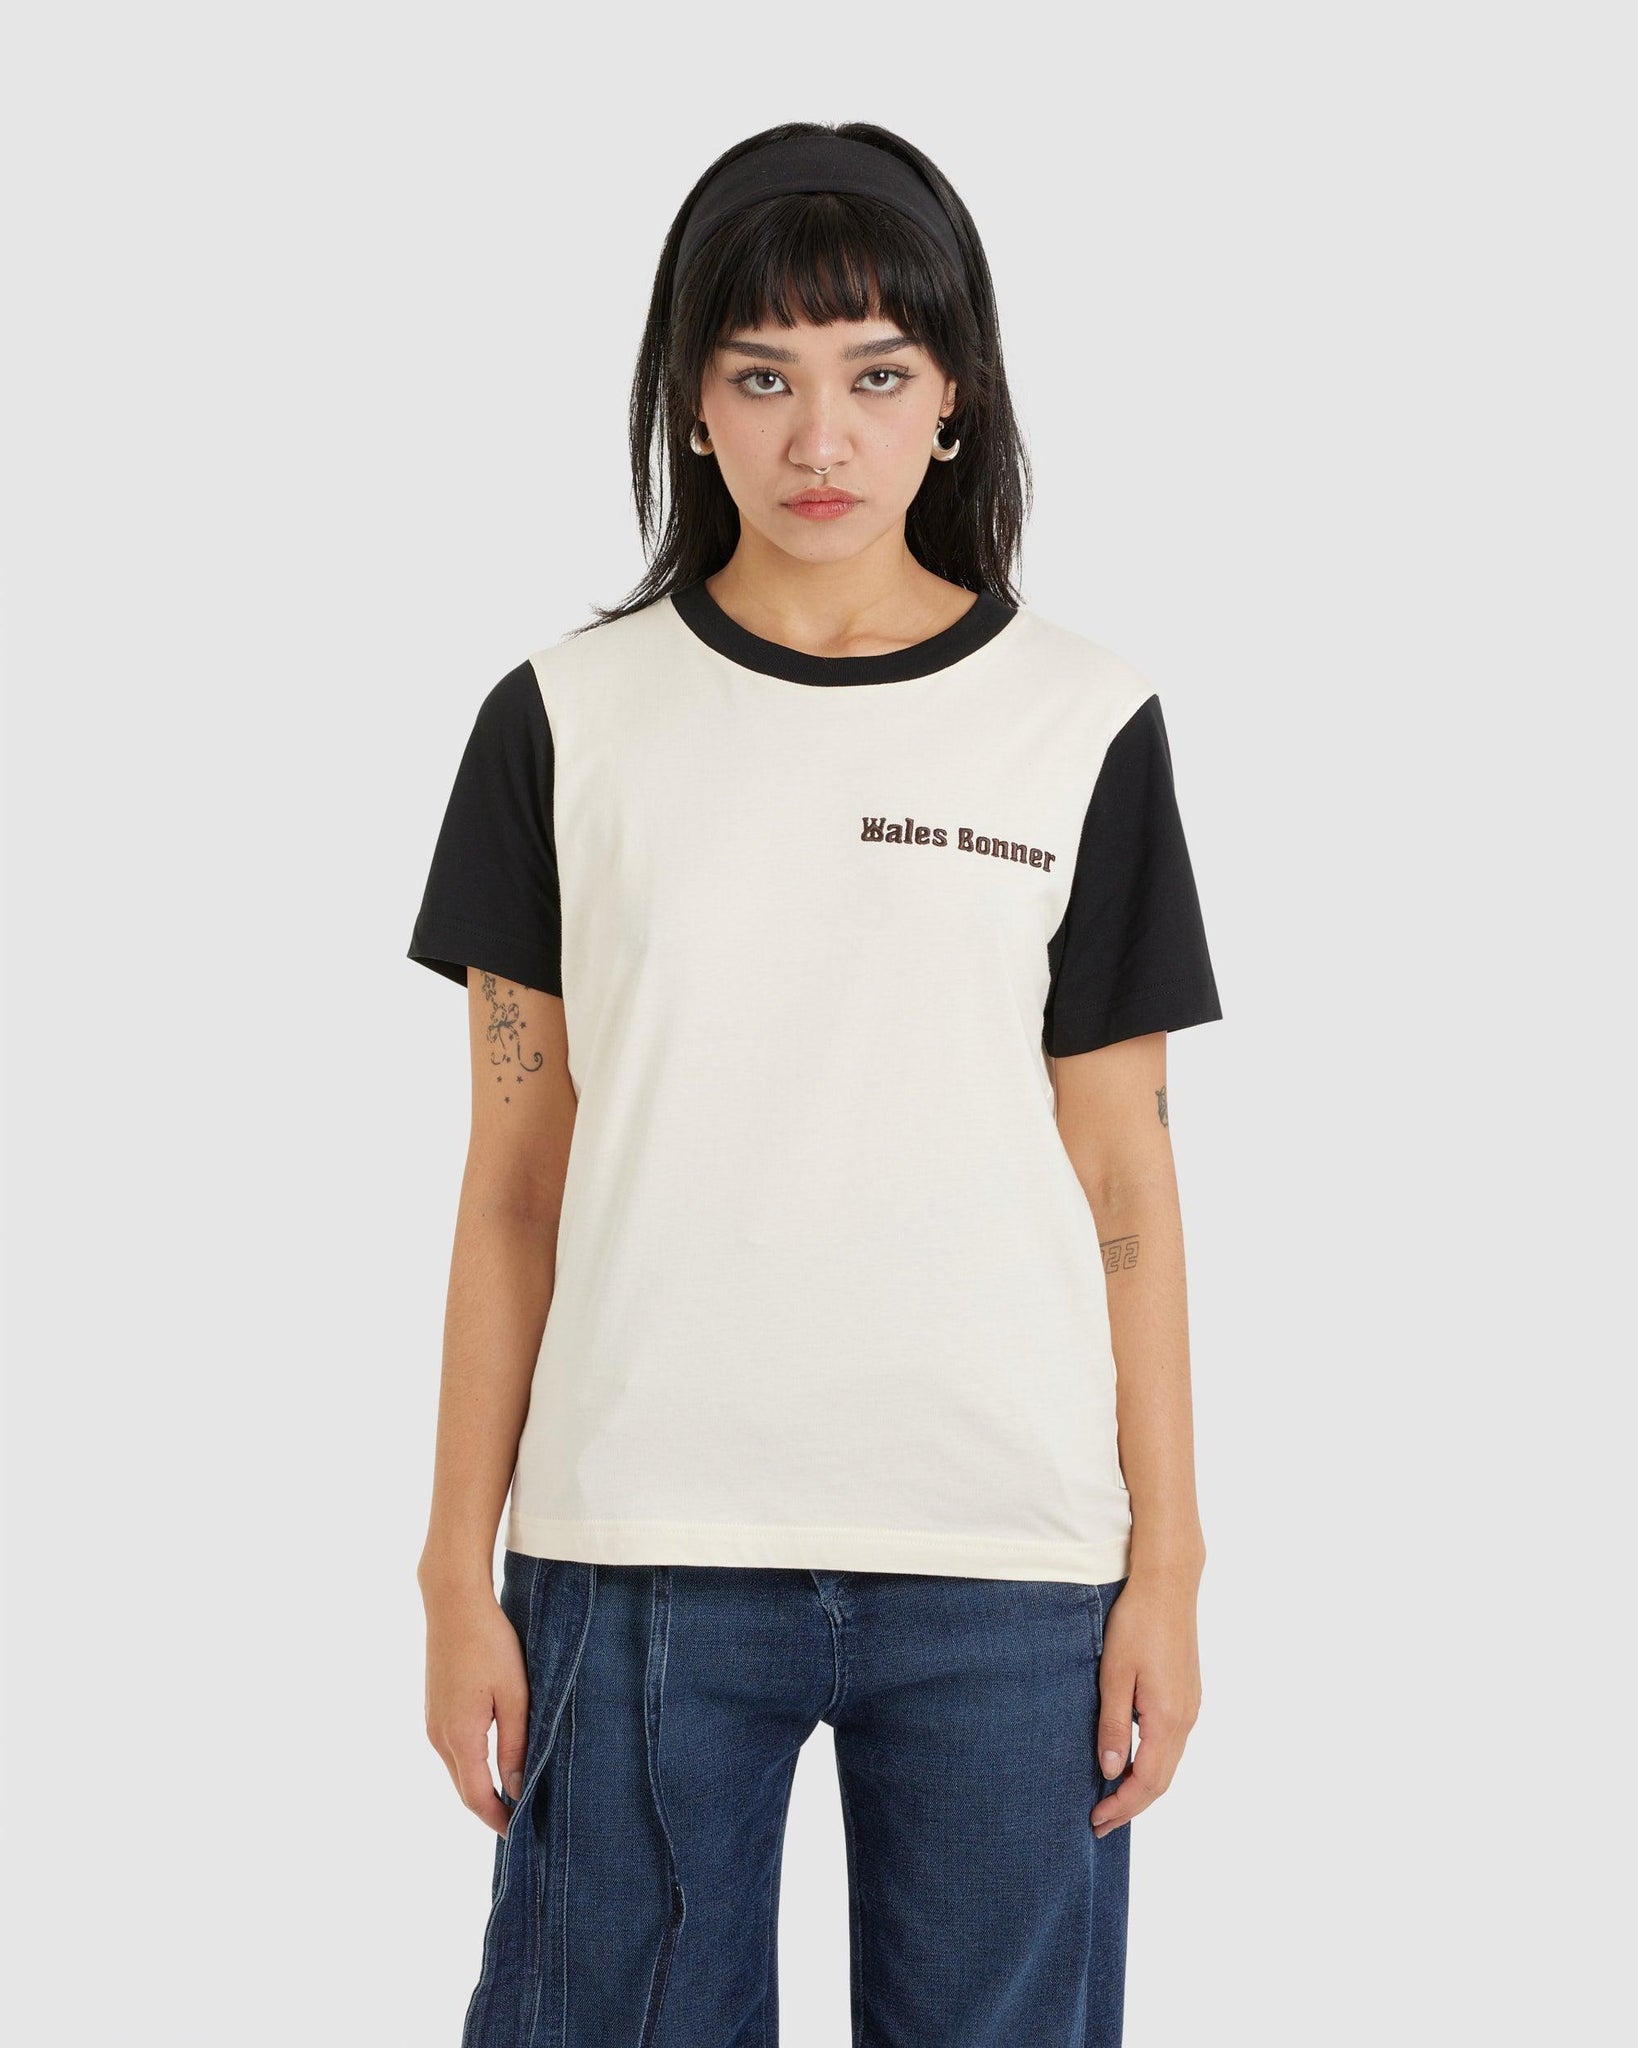 Morning Tee Black/Ivory (W) - {{ collection.title }} - Chinatown Country Club 